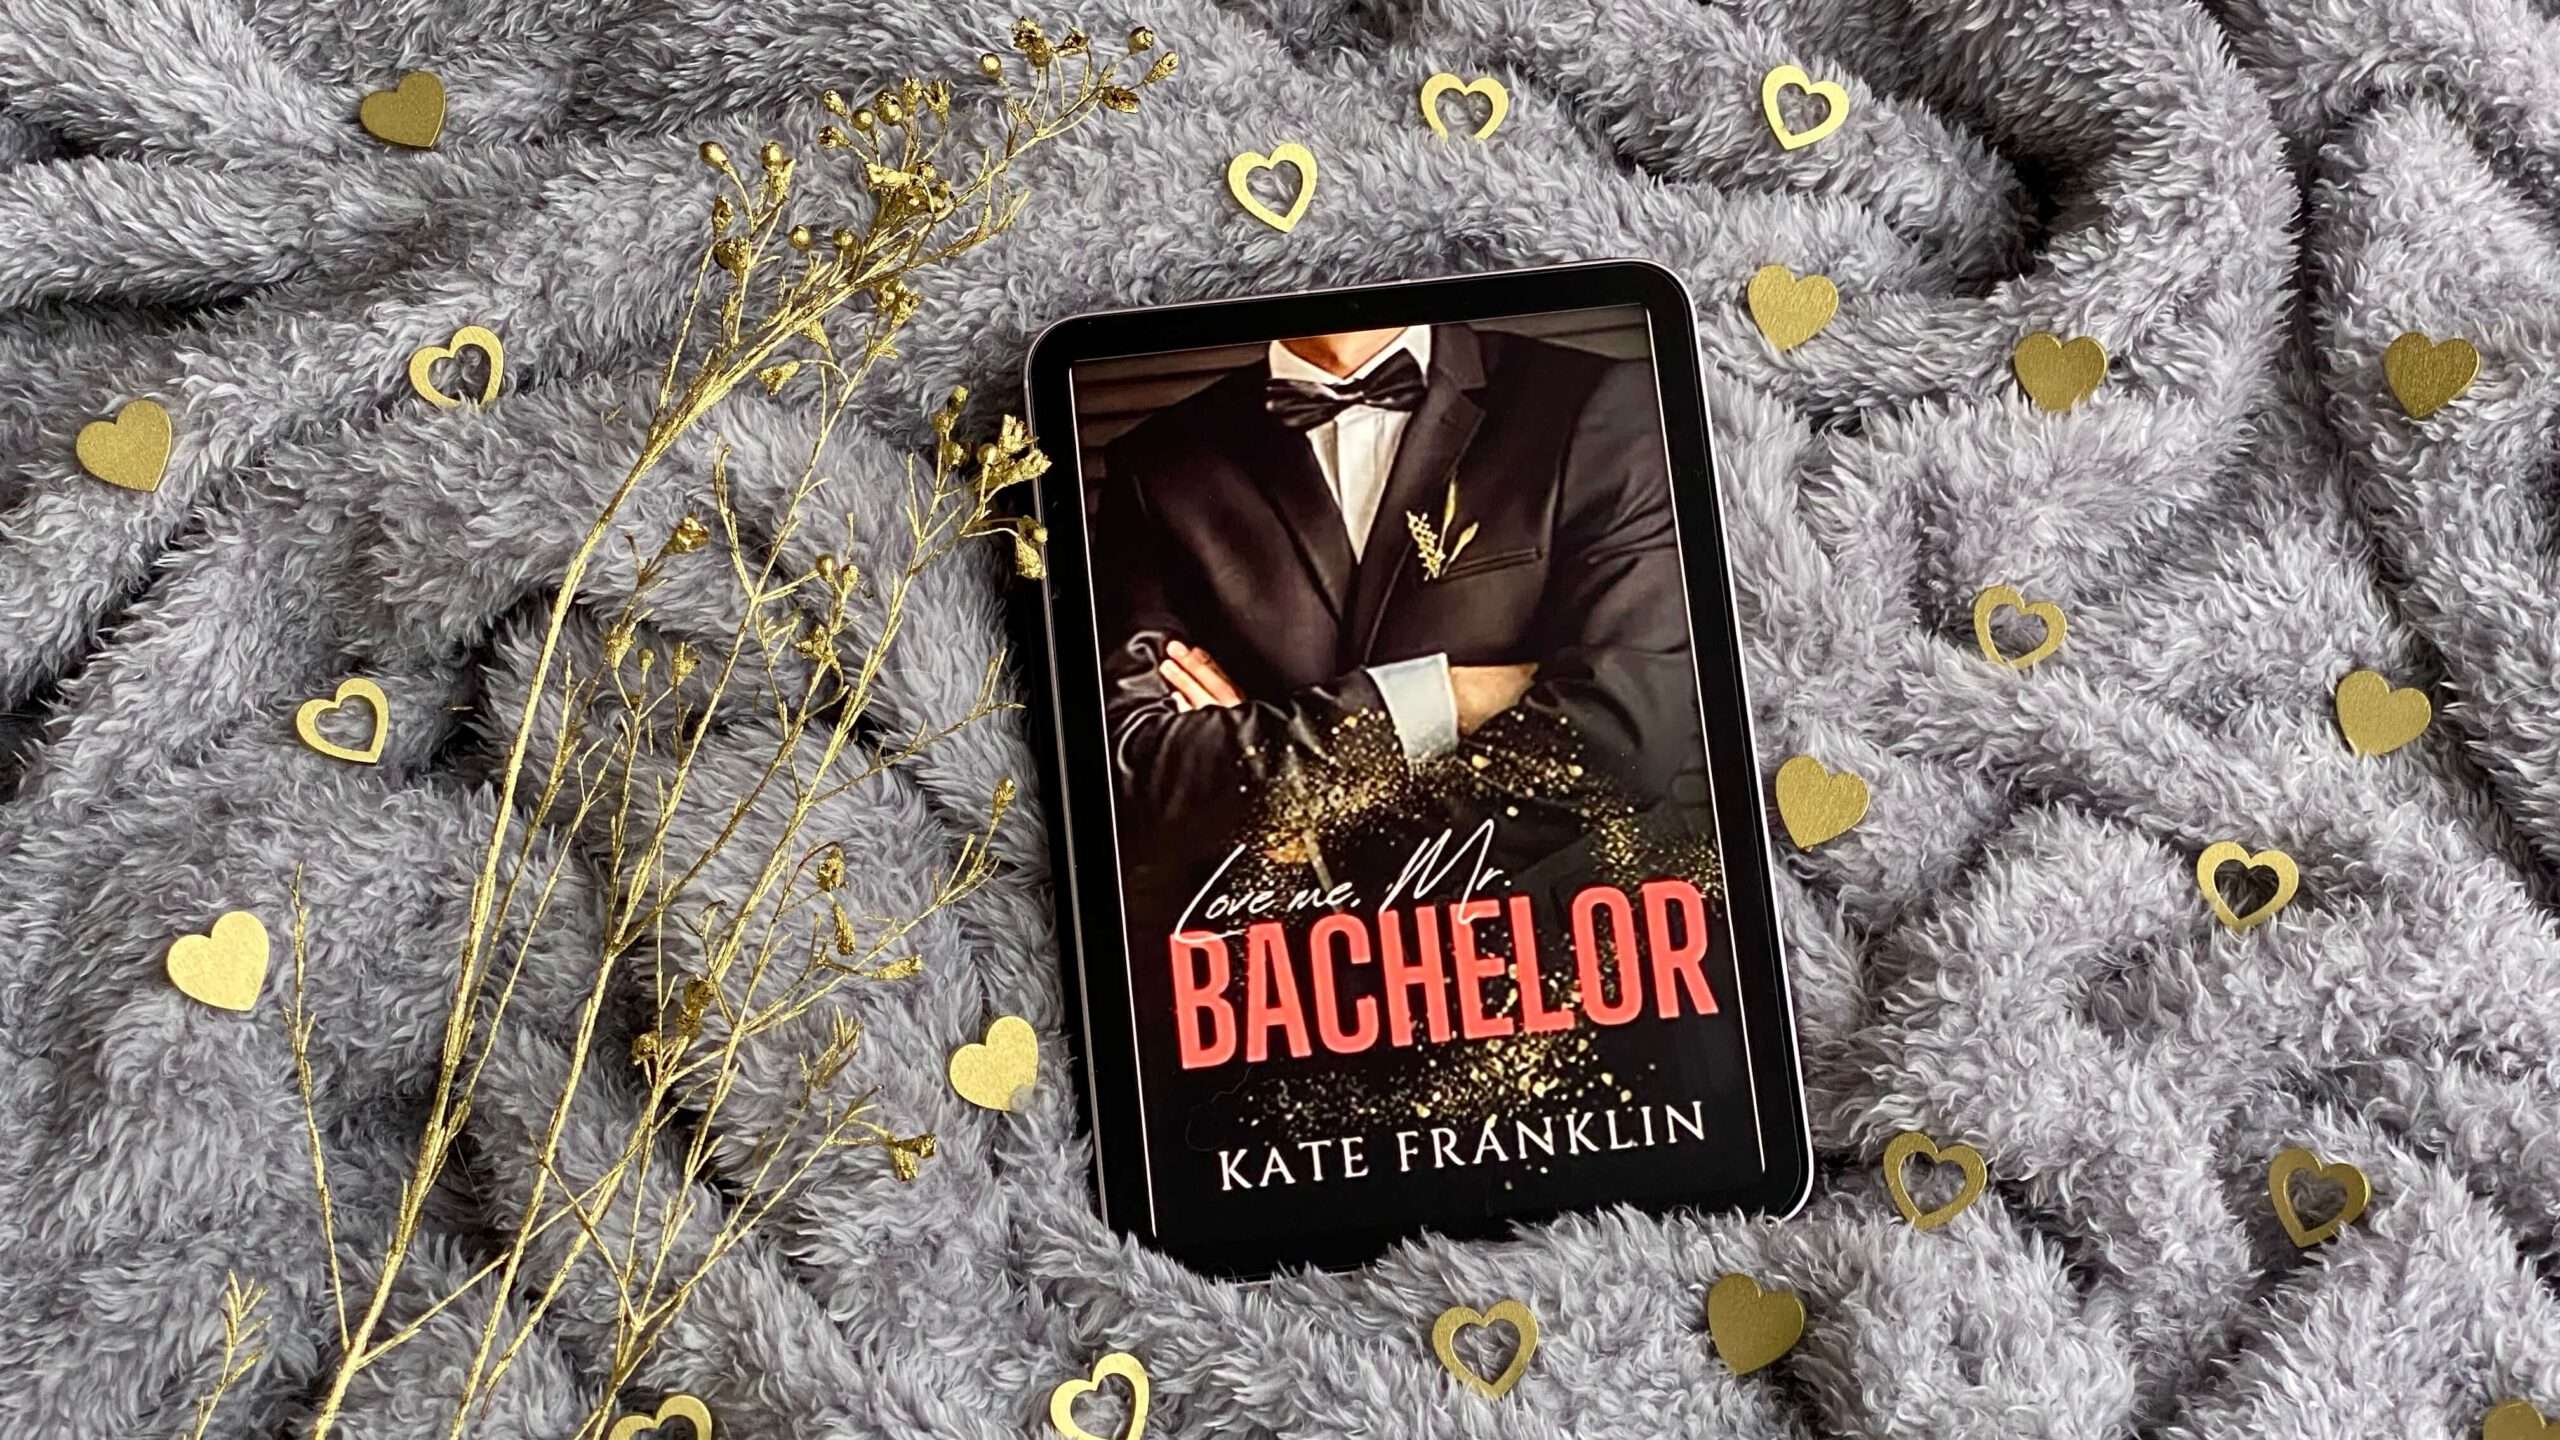 You are currently viewing „Love me, Mr. Bachelor“ von Kate Franklin